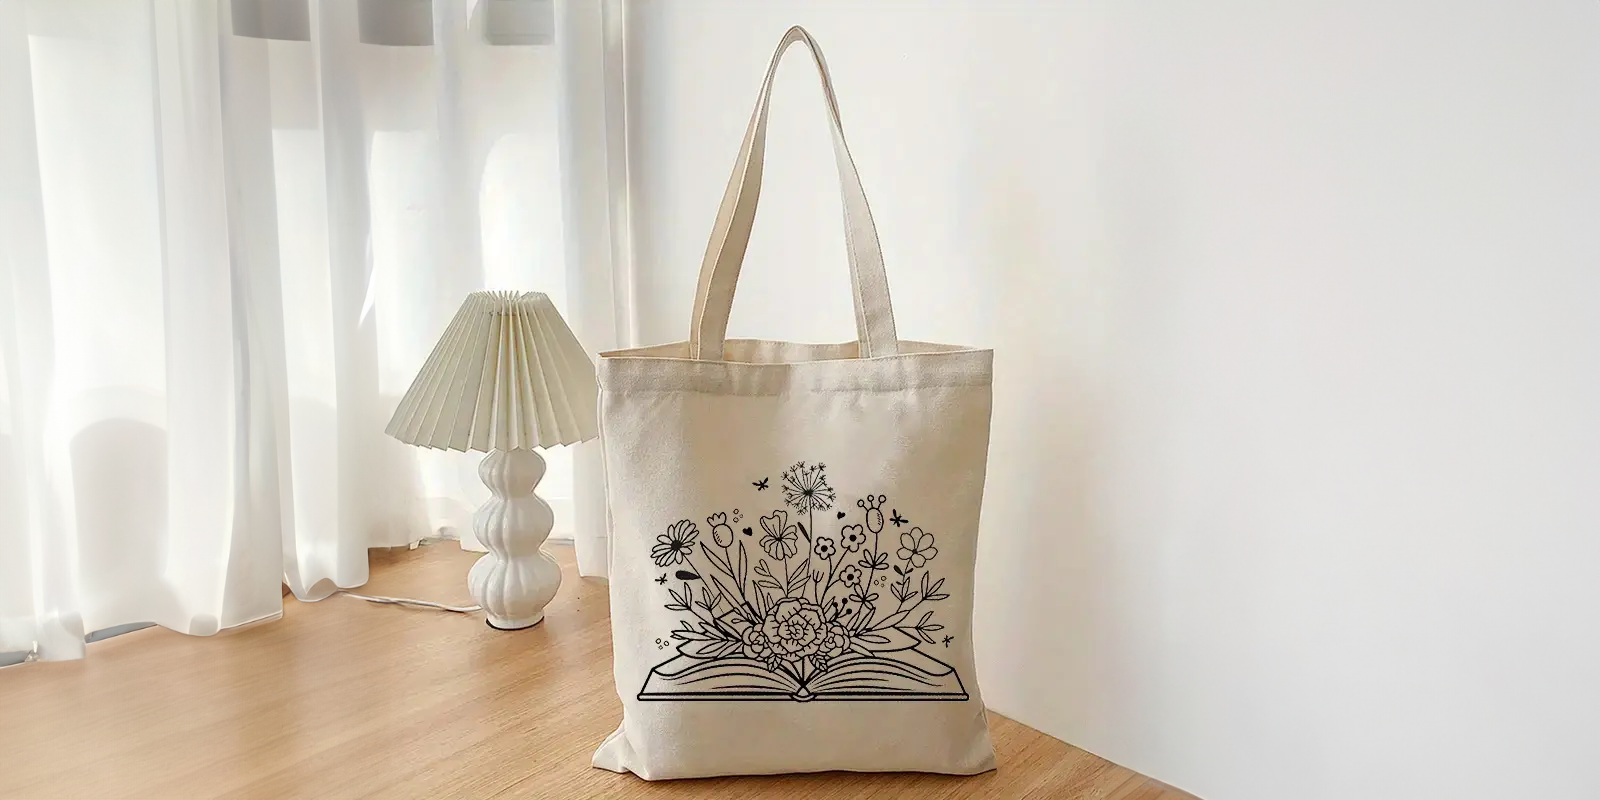 Bulk purchase of canvas tote bags with various designs